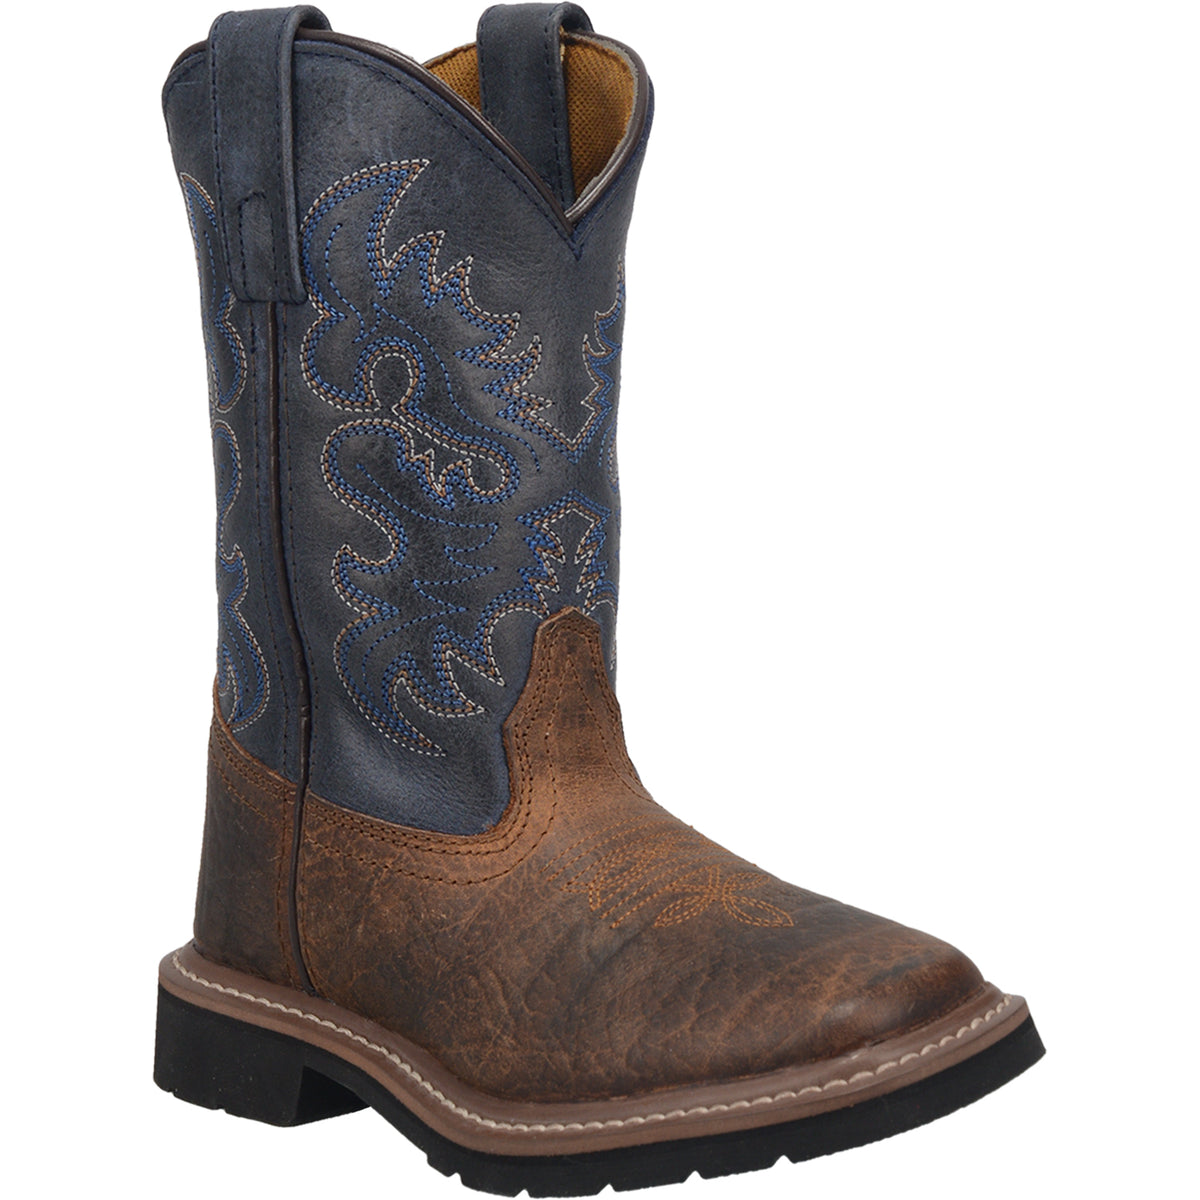 BRANTLEY LEATHER CHILDREN'S BOOT Cover